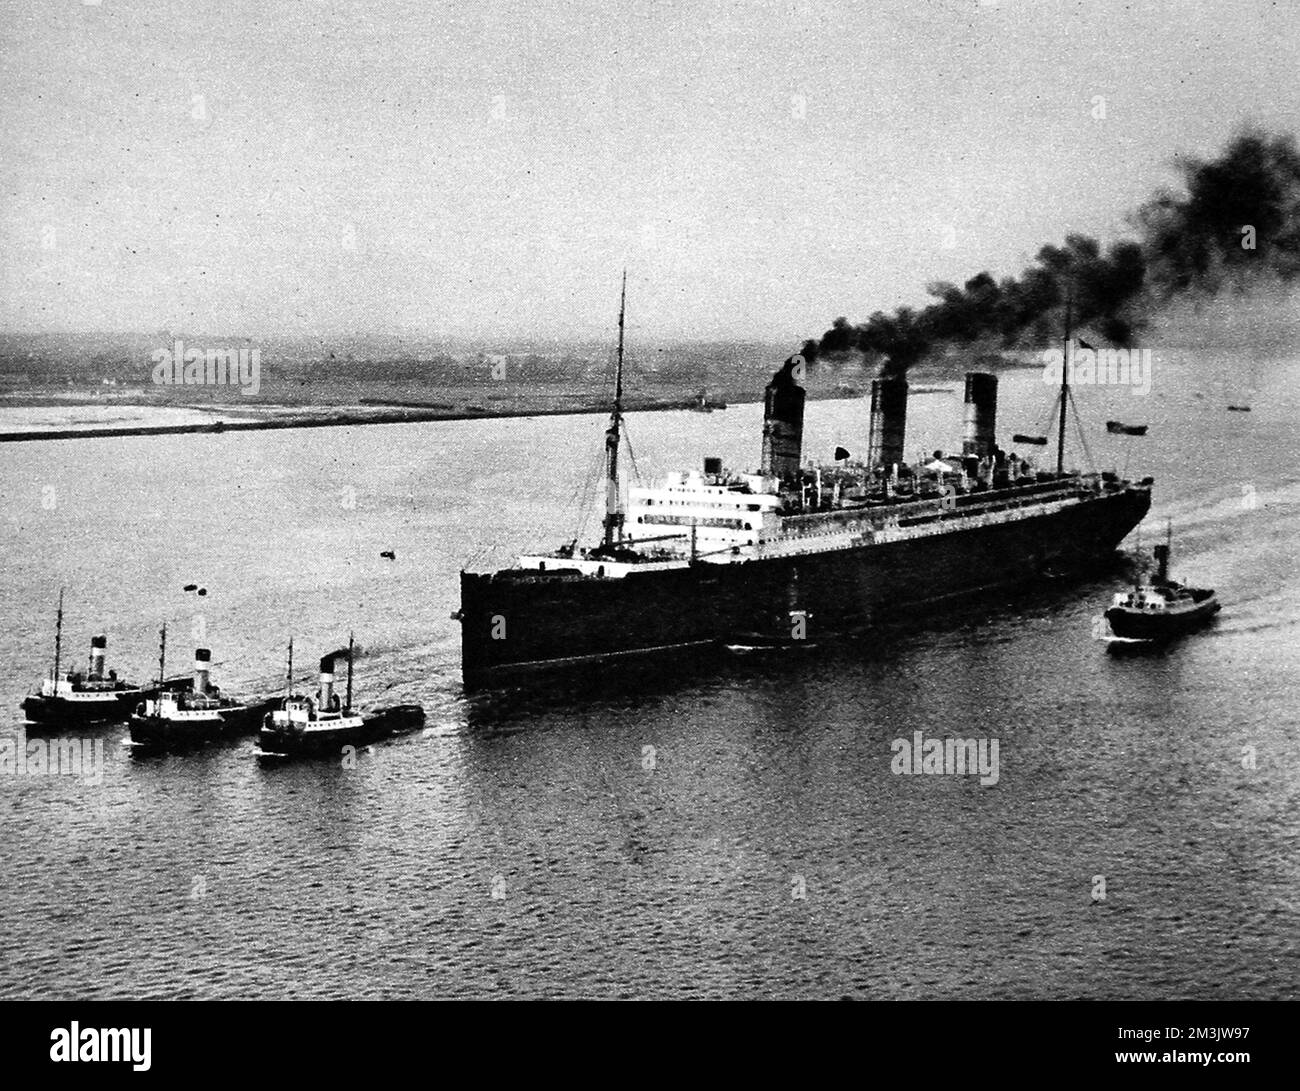 Photograph of the Cunard Liner 'Berengaria' heading out of Southampton, with tugs, to head to Jarrow to be broken up, December 1938. 'Berengaria' was built at the AG Vulcan shipyard, Hamburg, in 1913 and launched as 'Imperator' for the Hamburg-Amerika Line.   She was laid up, unused, during the First World War then given to Britain as war reparations at the ceasation of violence. Cunard bought her shortly thereafter and used her on the Southampton, Cherbourg, New York route from 1921 until 1938. Unfortunately she lost her Passenger Certificate in 1938 due to the senility of her electrica Stock Photo